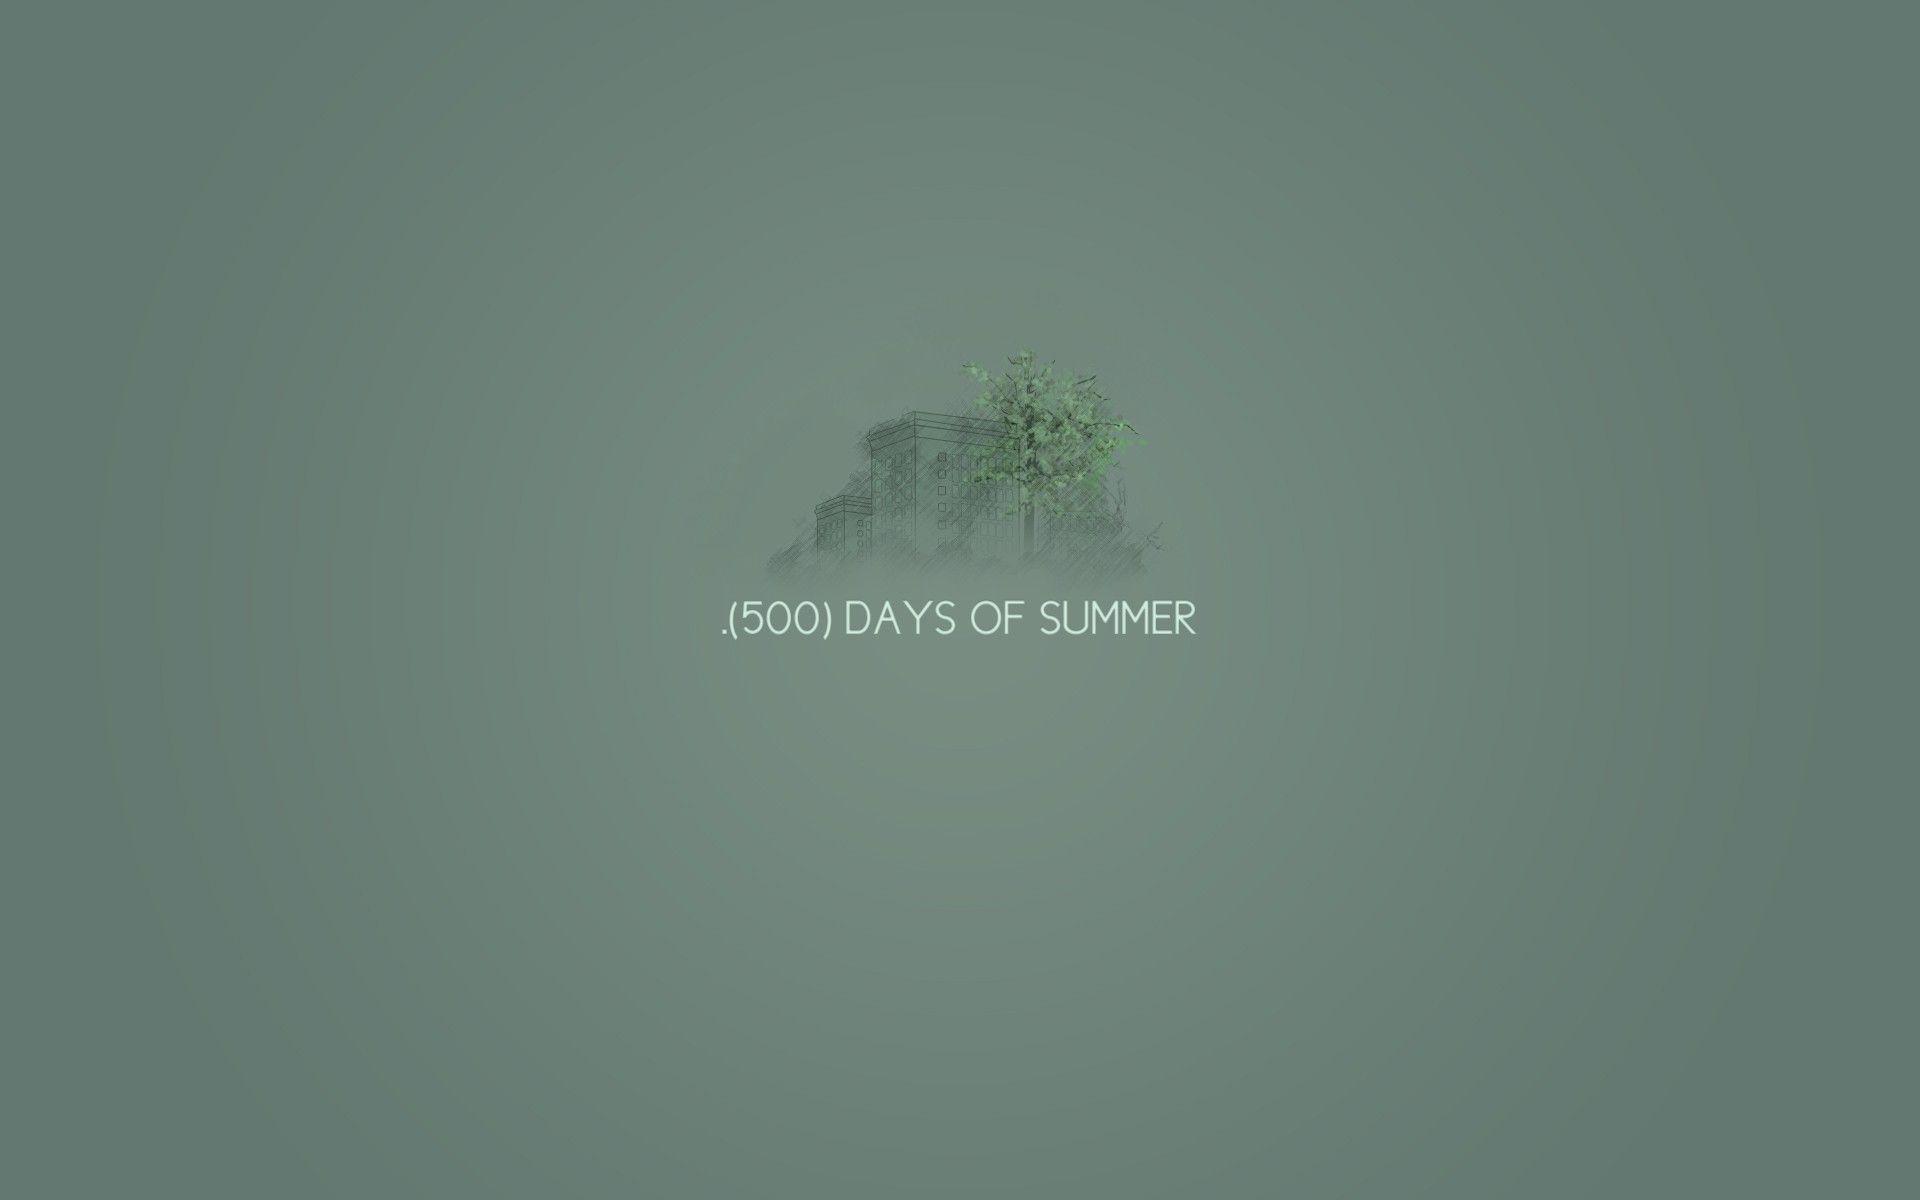 Download the 500 Days of Summer Wallpaper, 500 Days of Summer iPhone